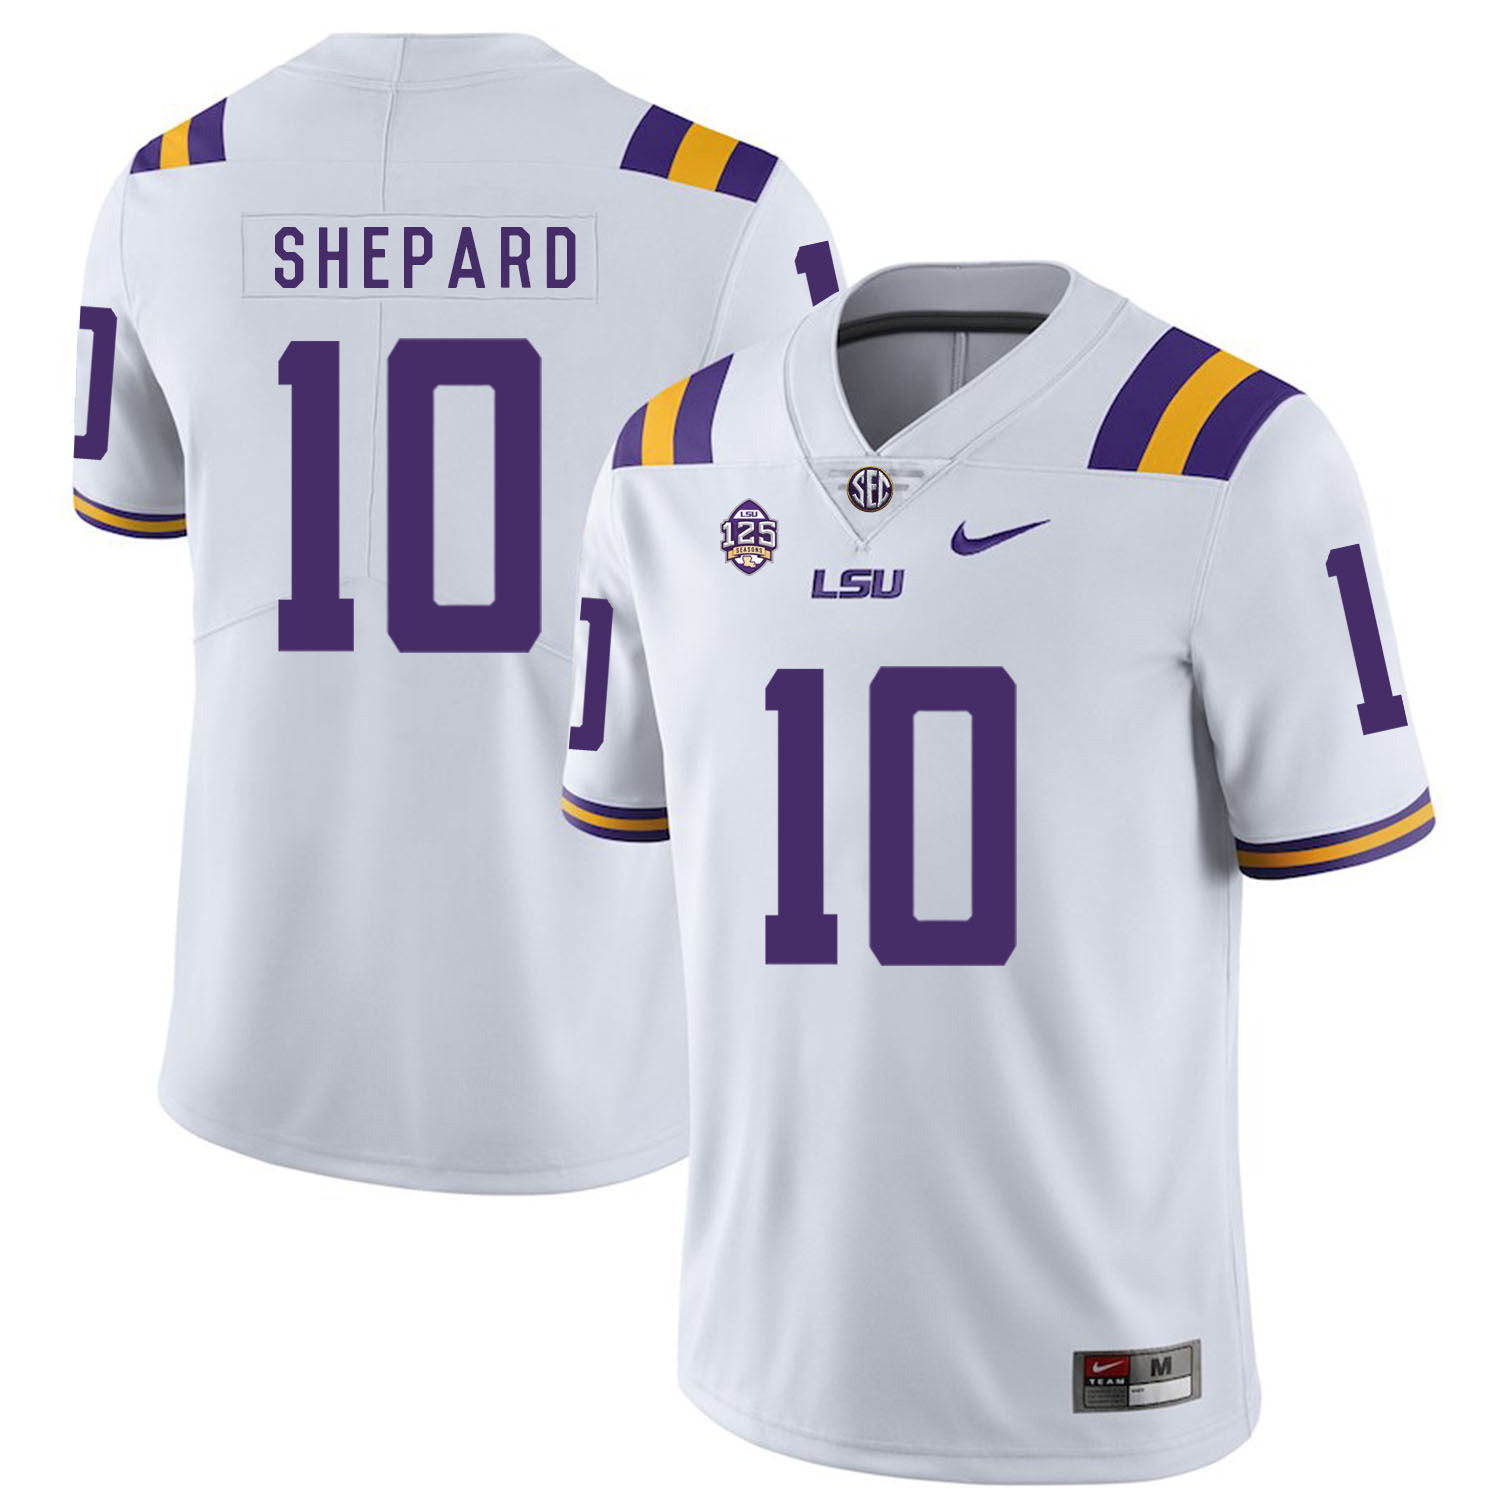 LSU Tigers 10 Russell Shepard White Nike College Football Jersey